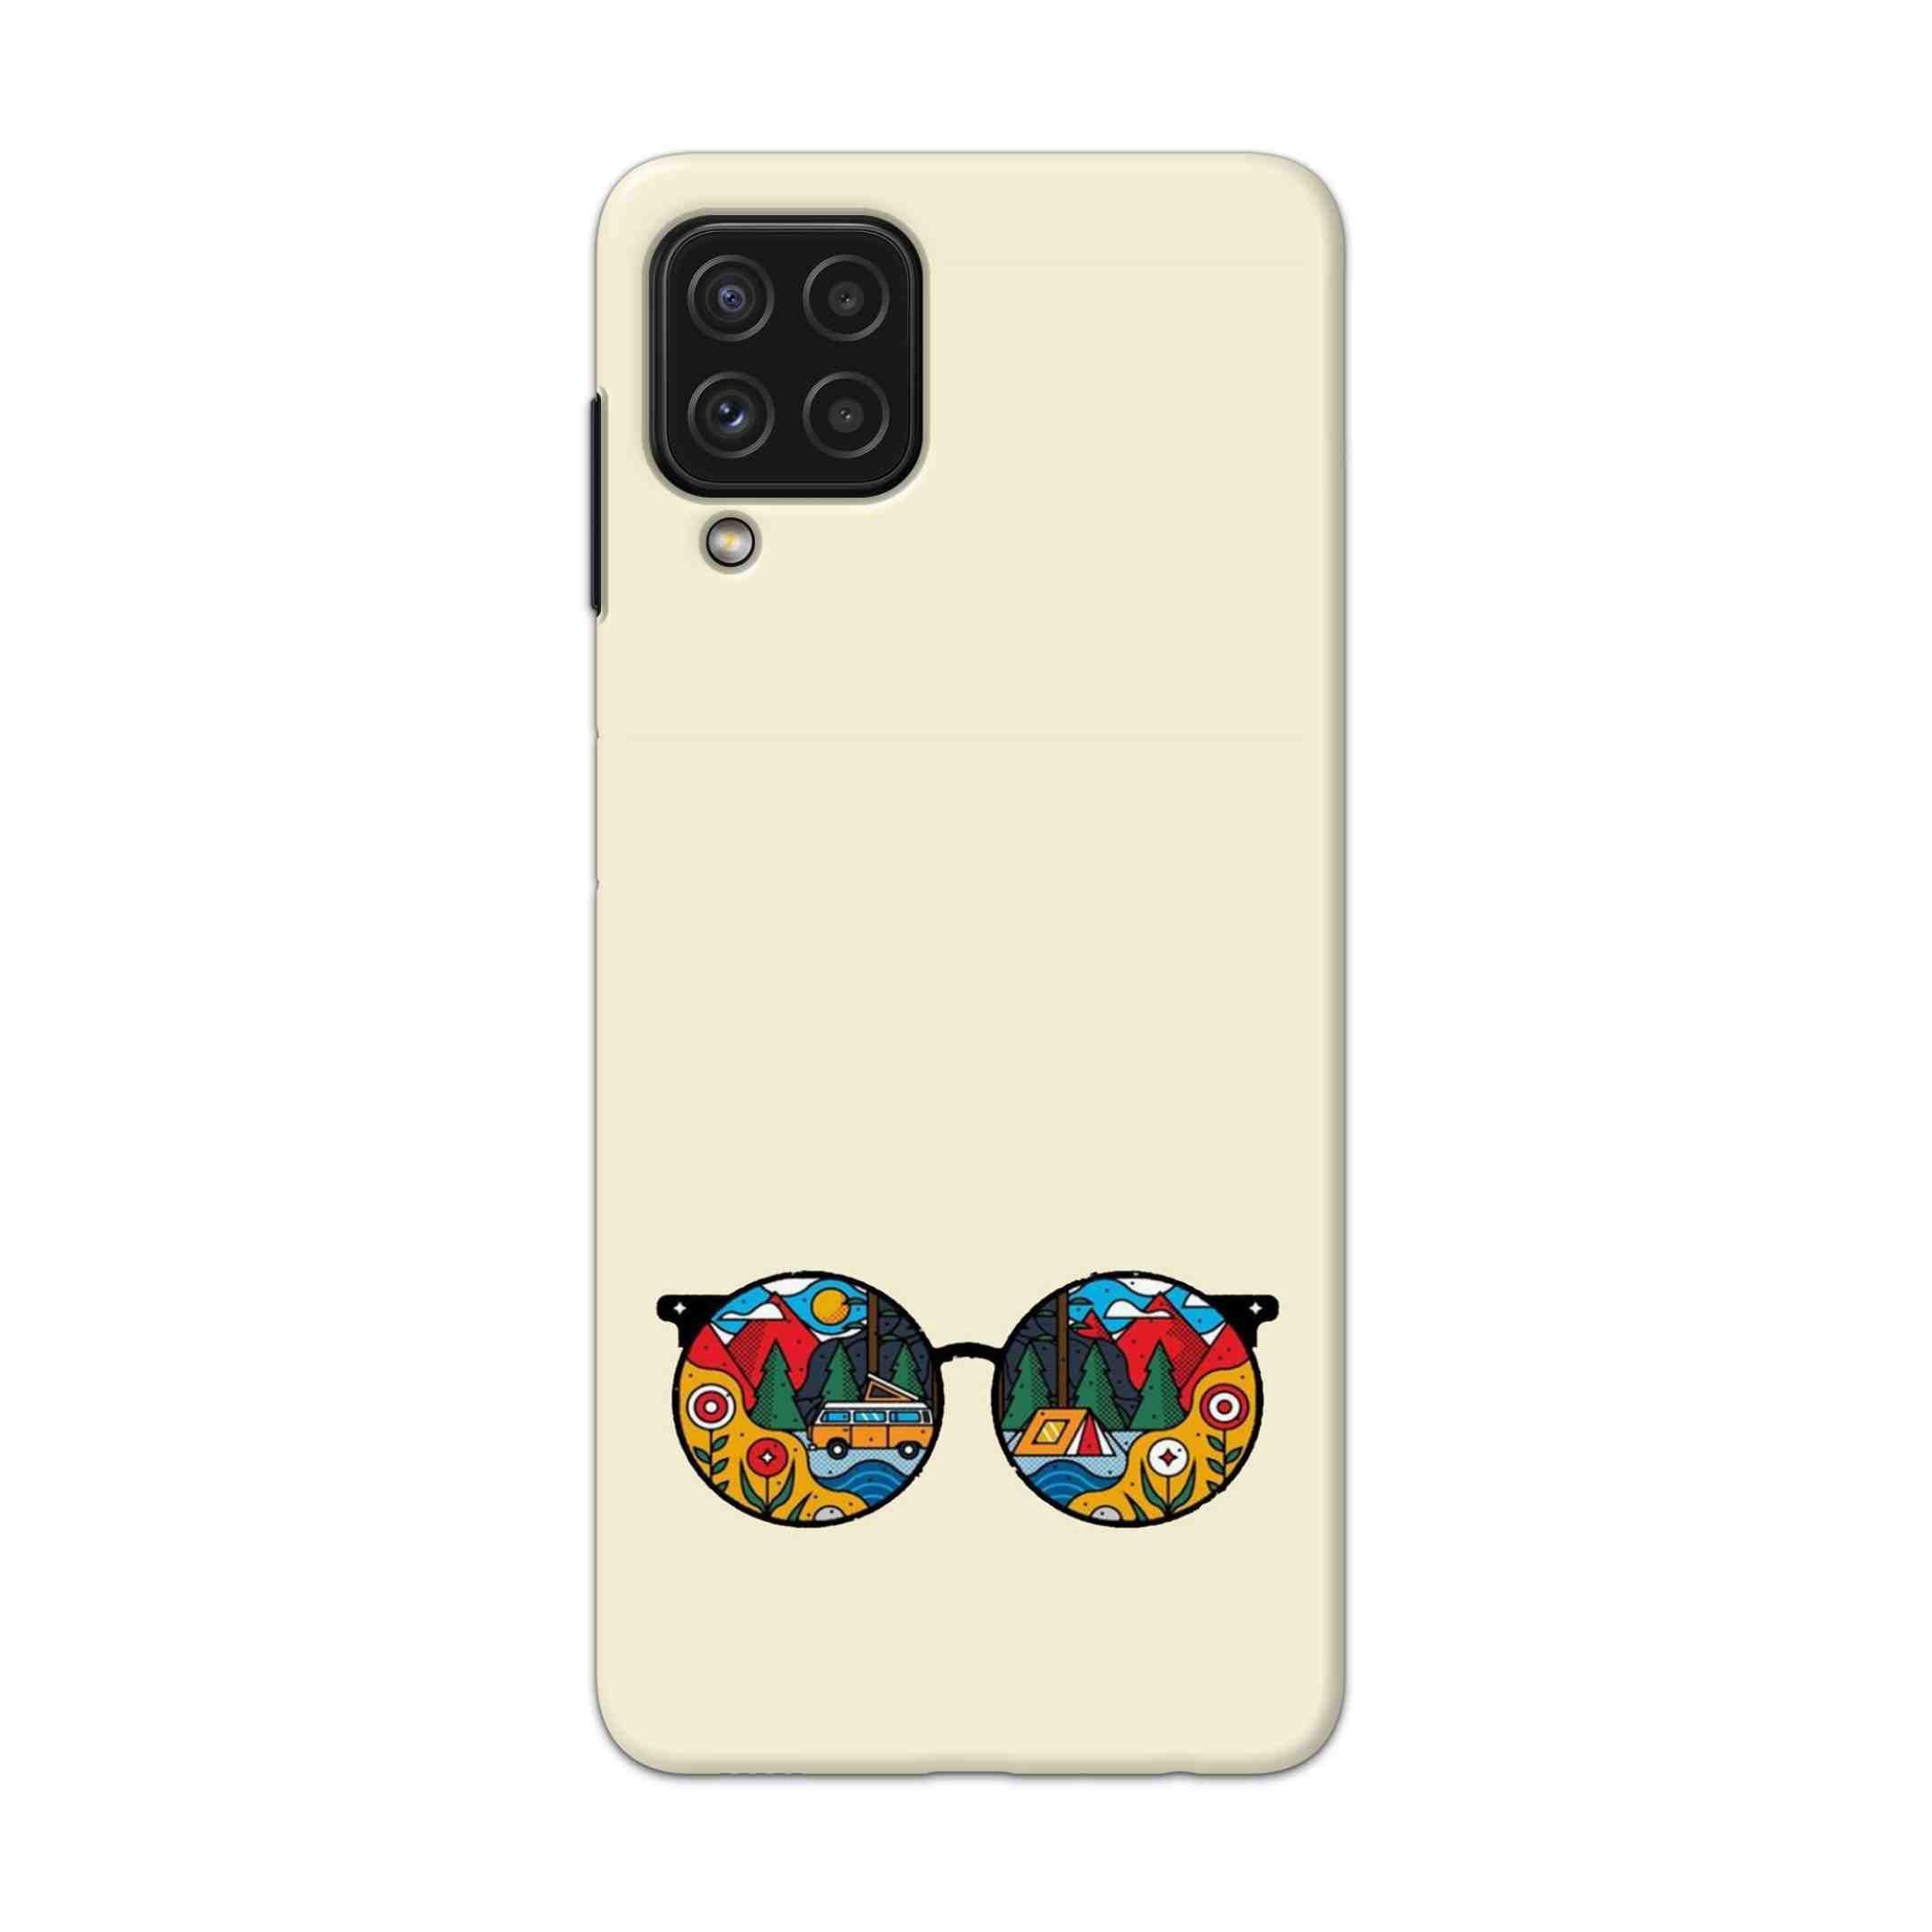 Buy Rainbow Sunglasses Hard Back Mobile Phone Case Cover For Samsung Galaxy A22 Online